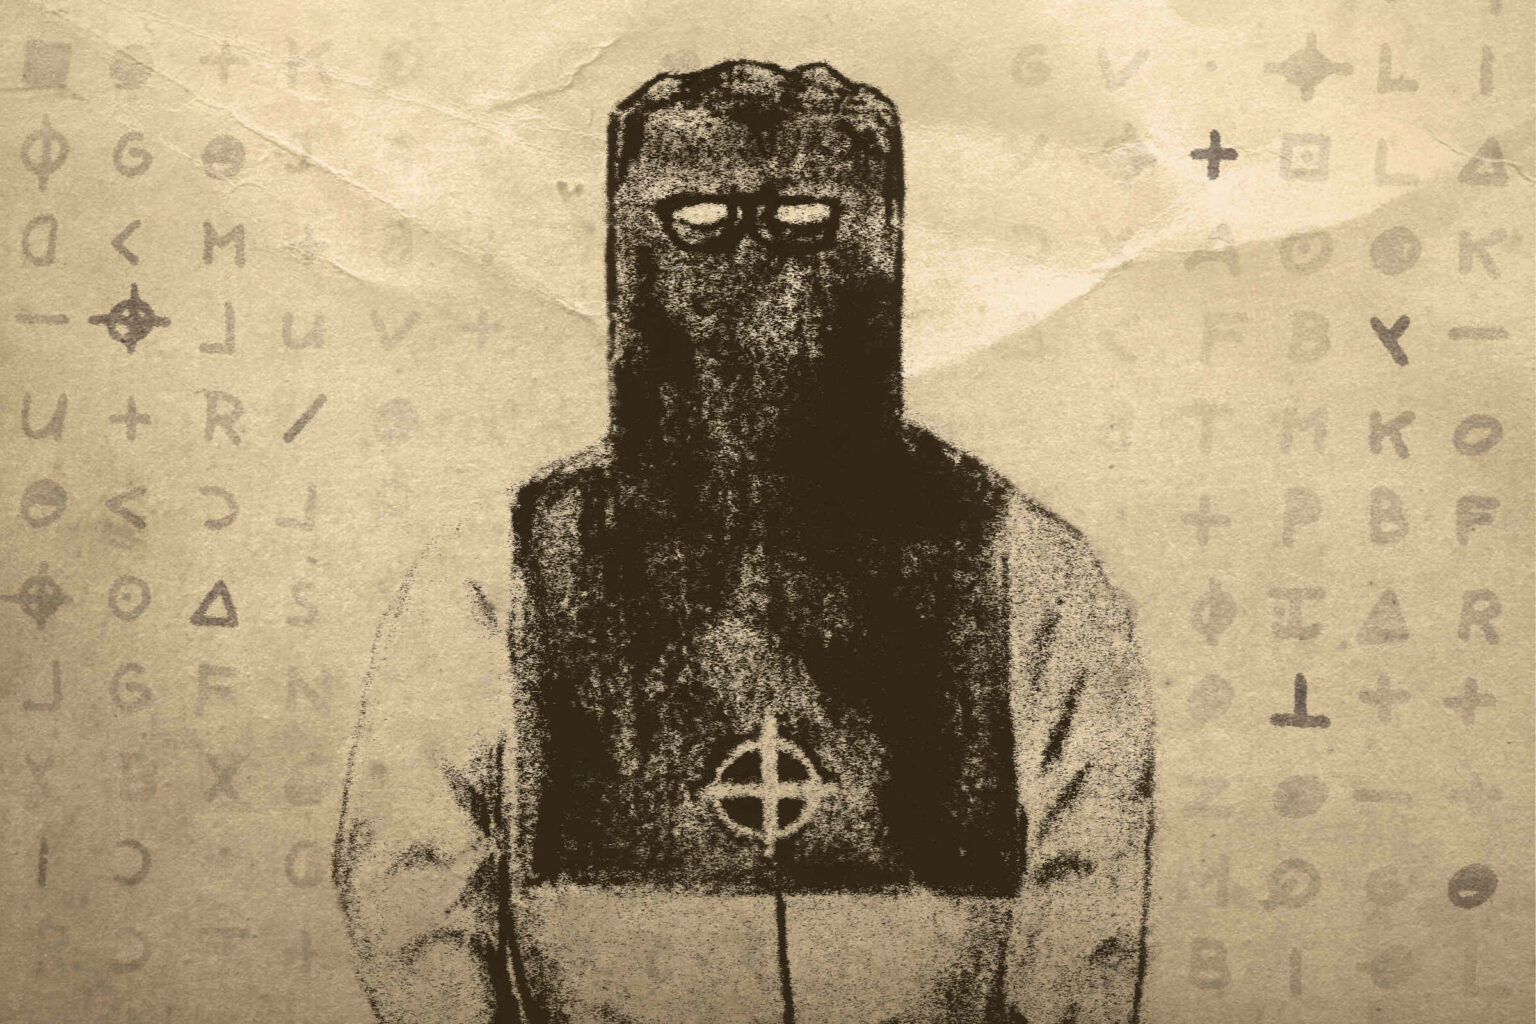 Very little has captured public attention like the enigmatic Zodiac Killer, but was the serial menace finally caught or should people still be afraid?